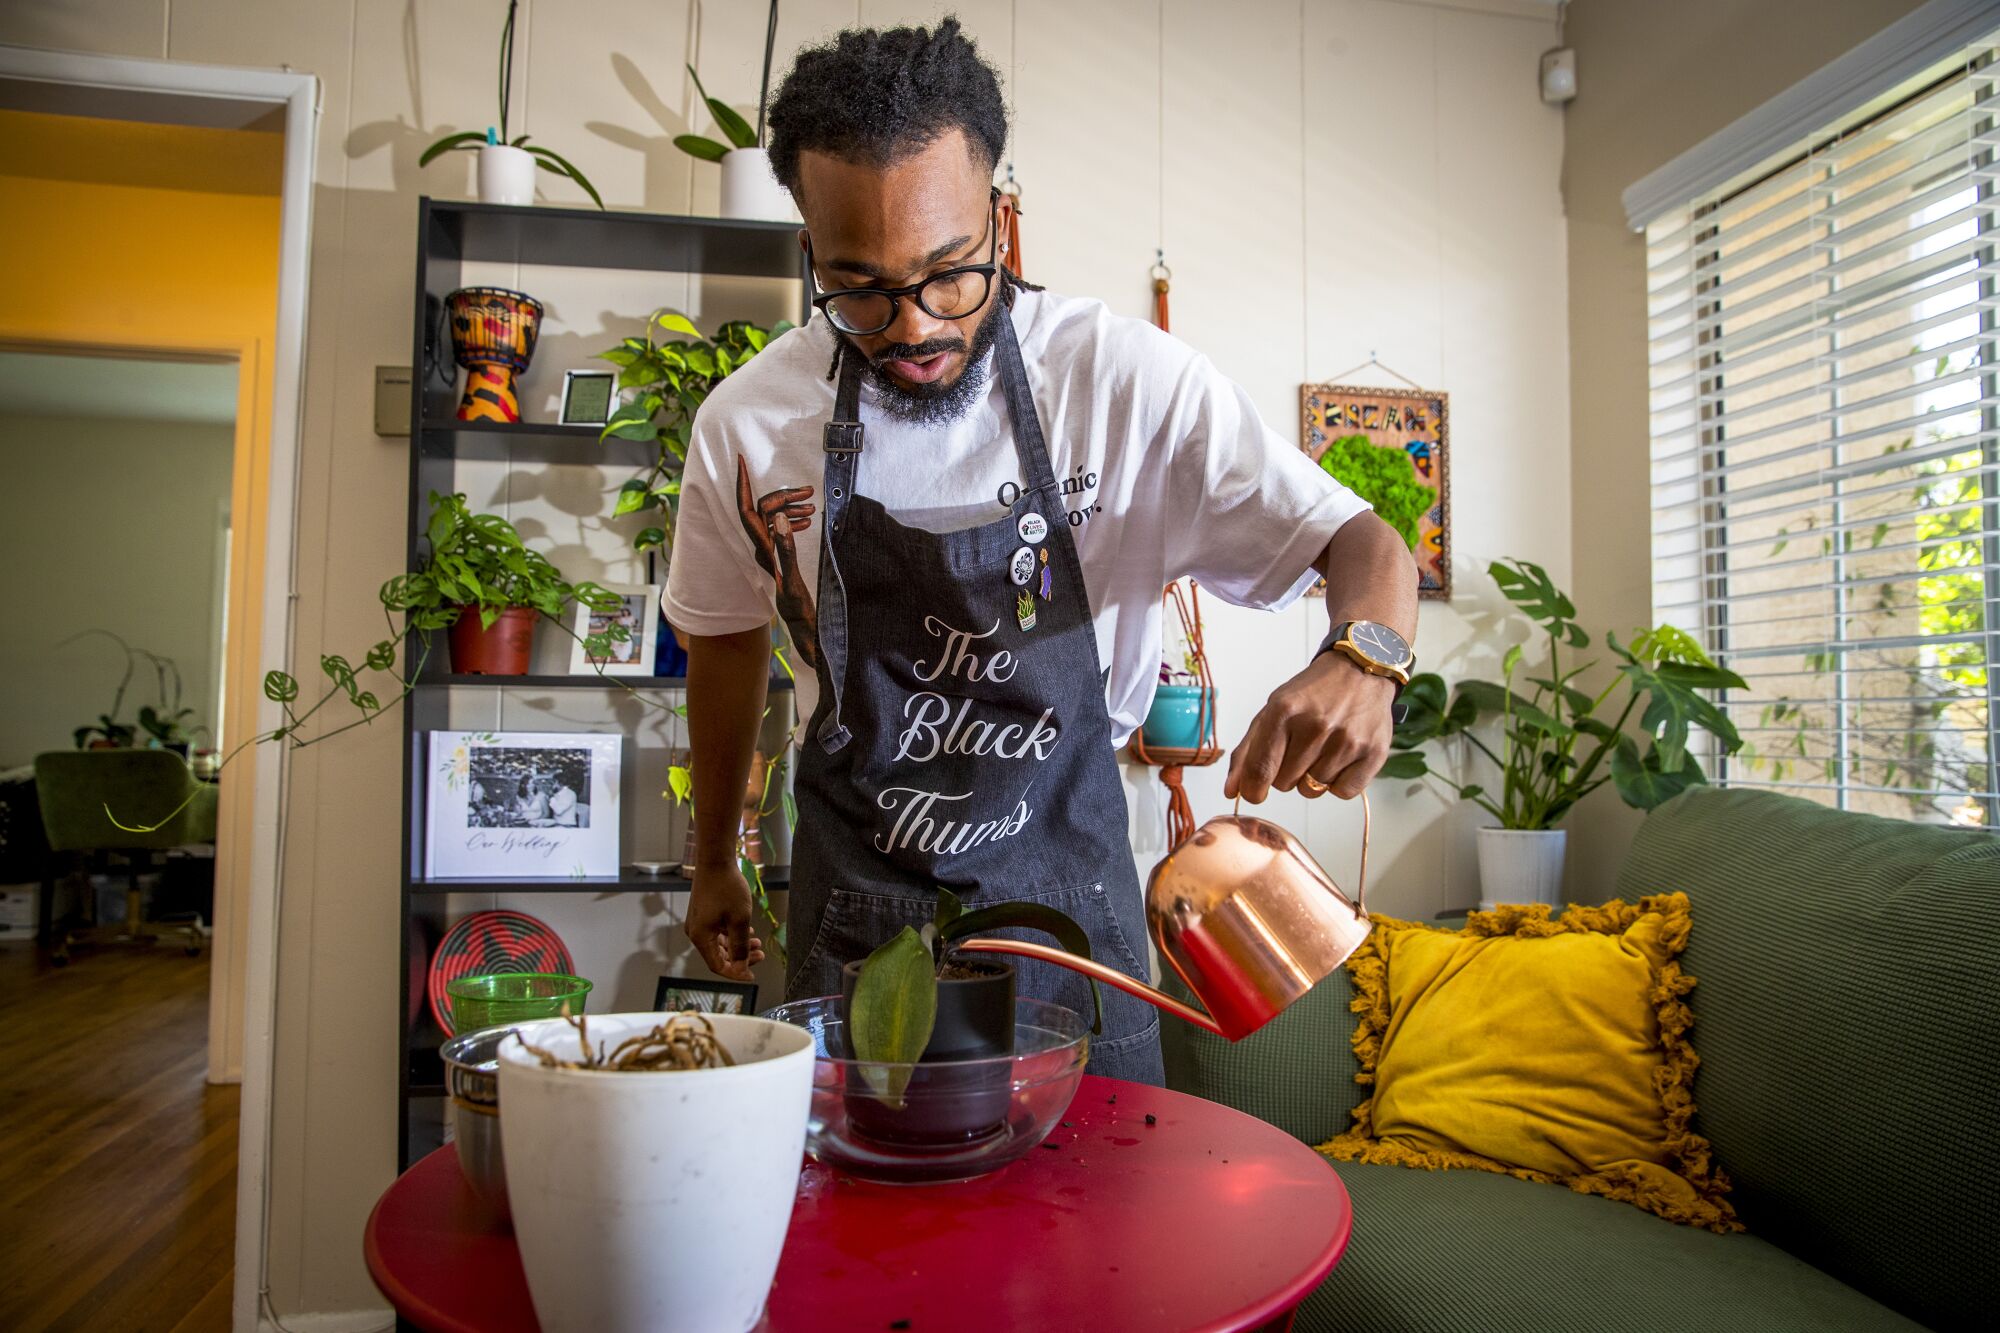 A man wearing an apron that says "the Black Thumb" waters potted orchids in a sunny room.